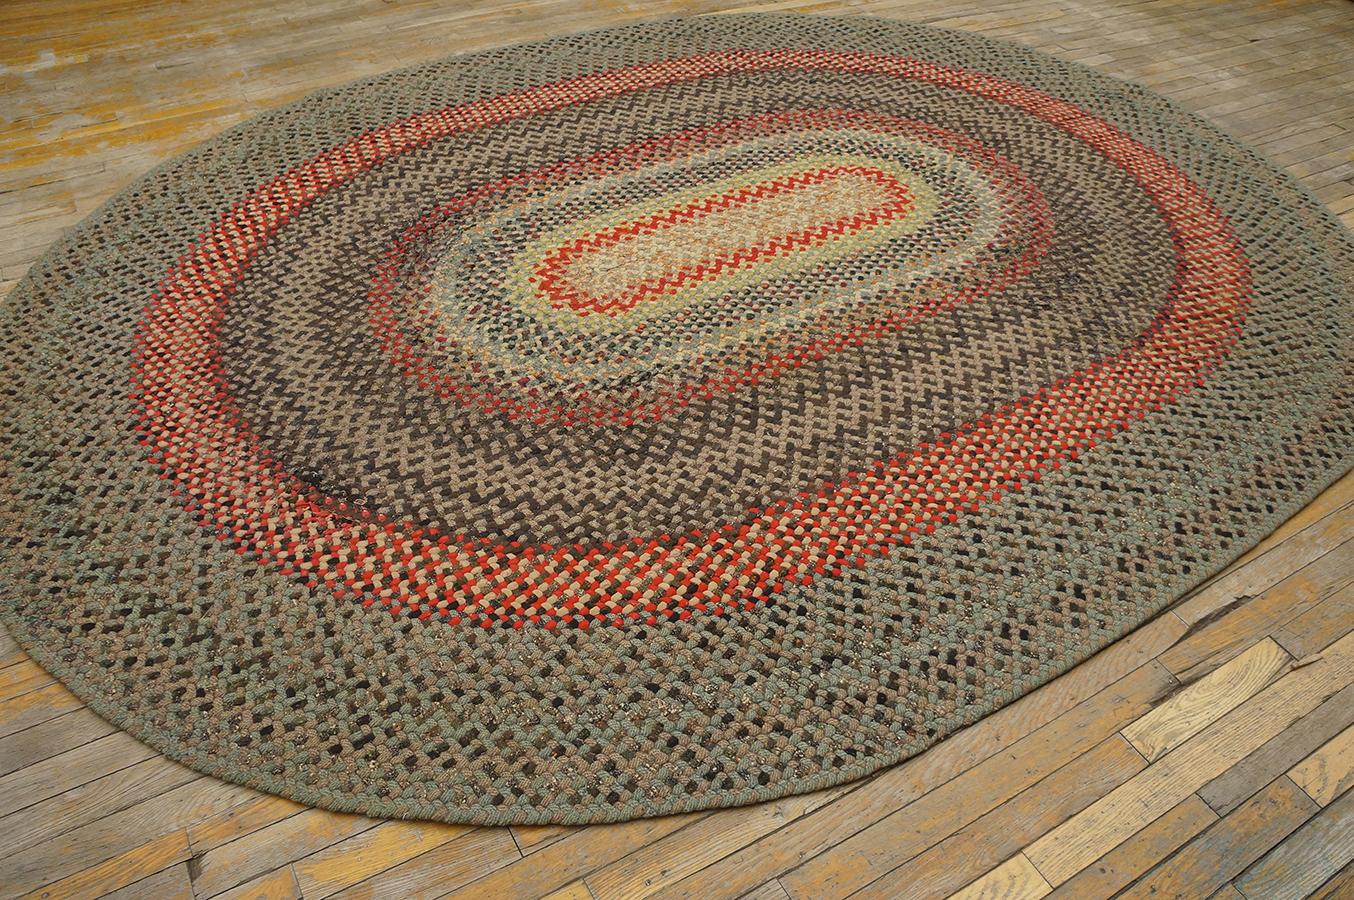 Hand-Woven 1940s American Braided Rug ( 9' 9